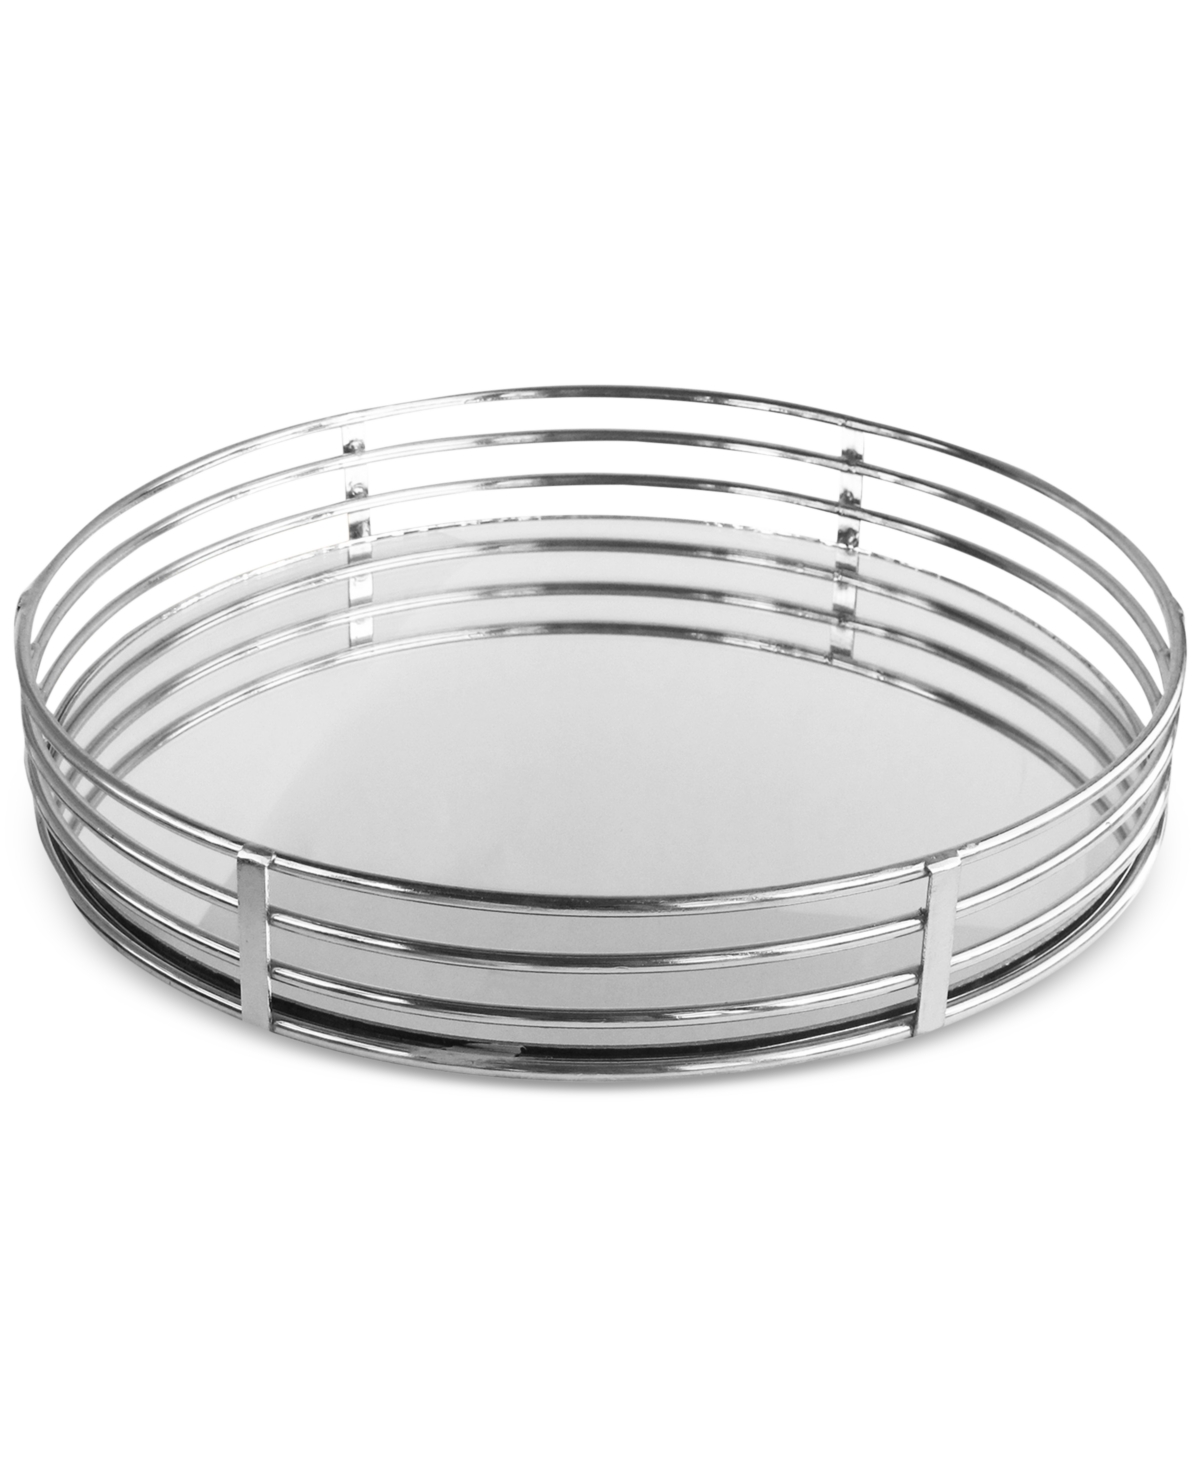 Jay Imports Circle Mirrored Tray In Silver